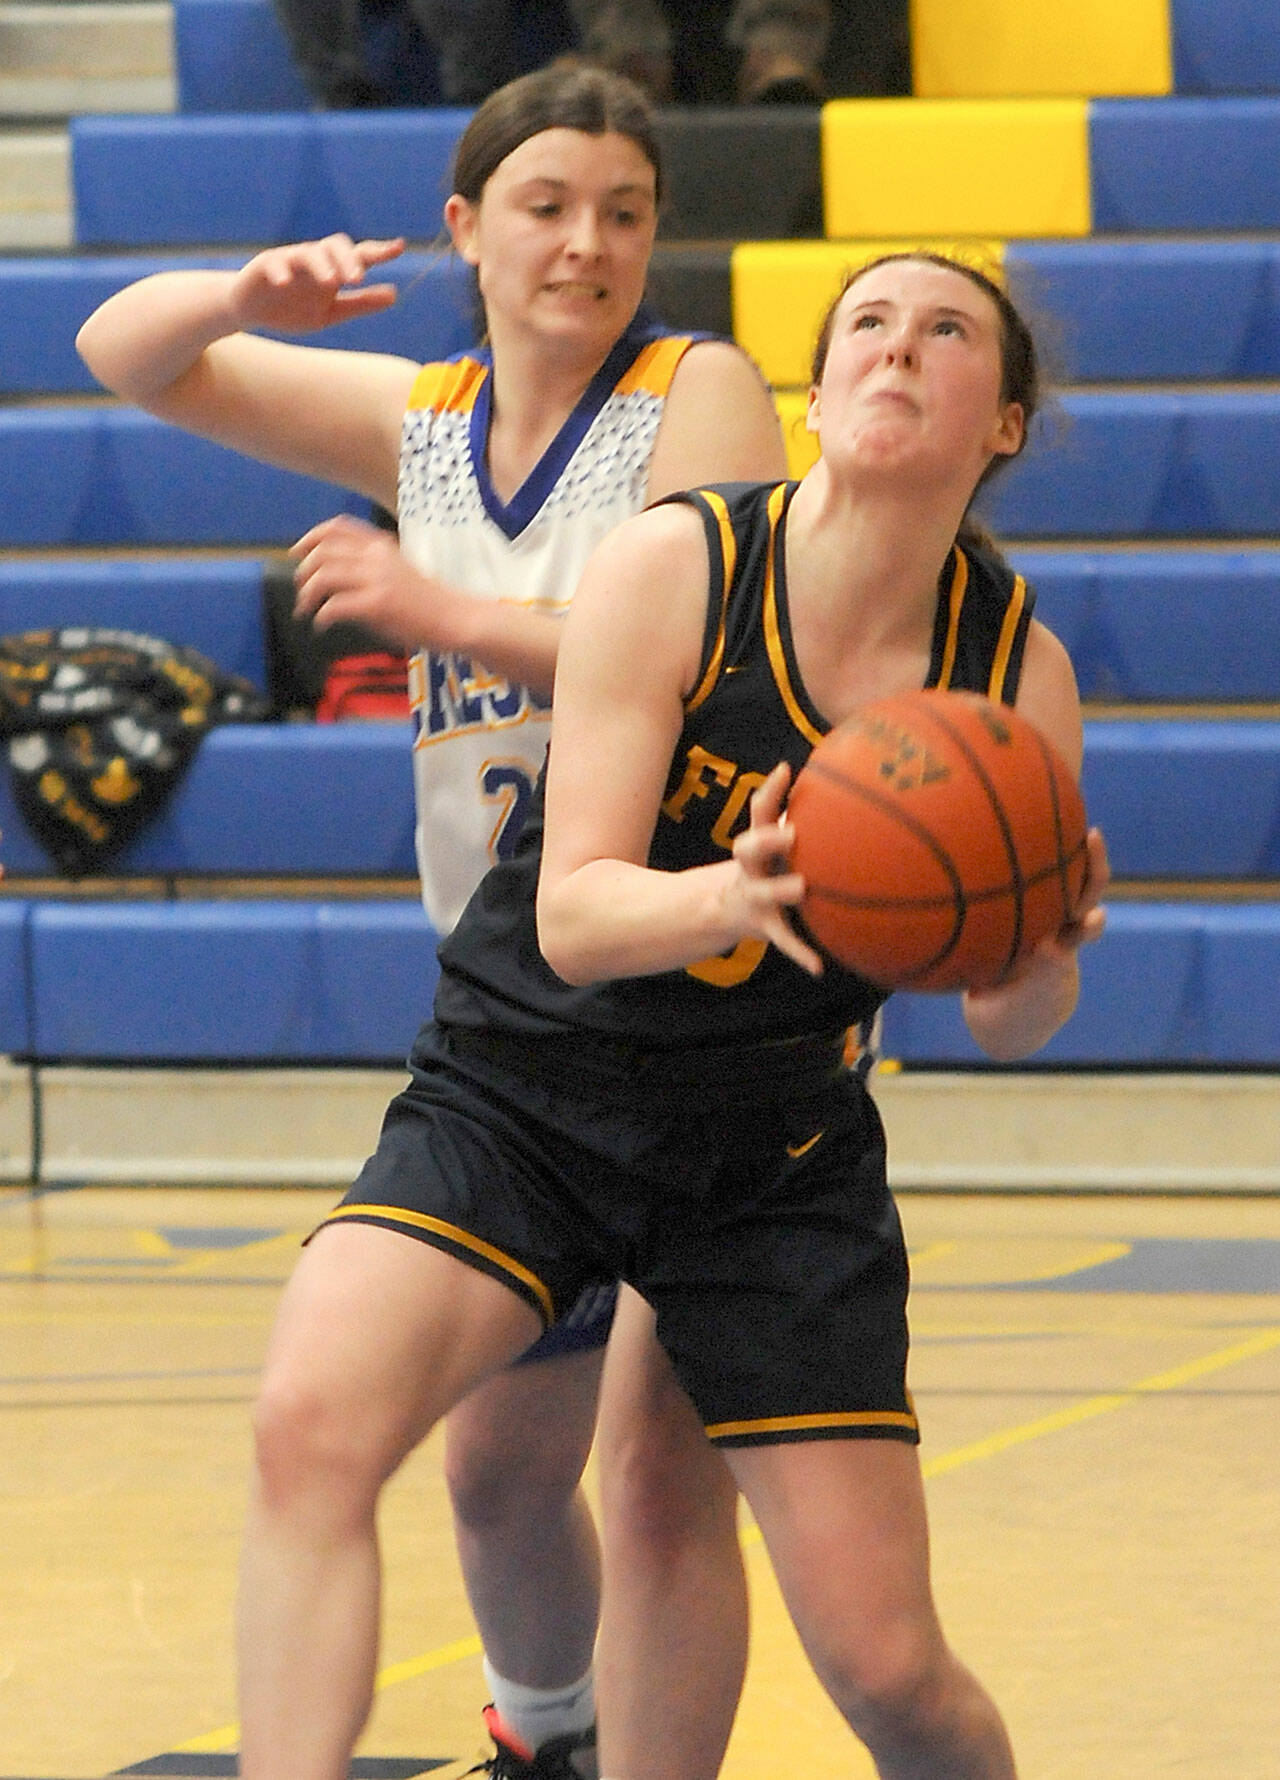 Forks’ Keira Johnson looks for the hoop as Crescent’s Kaylen Mason tries to defend on Wednesday at Crescent High School. (Keith Thorpe/Peninsula Daily News)